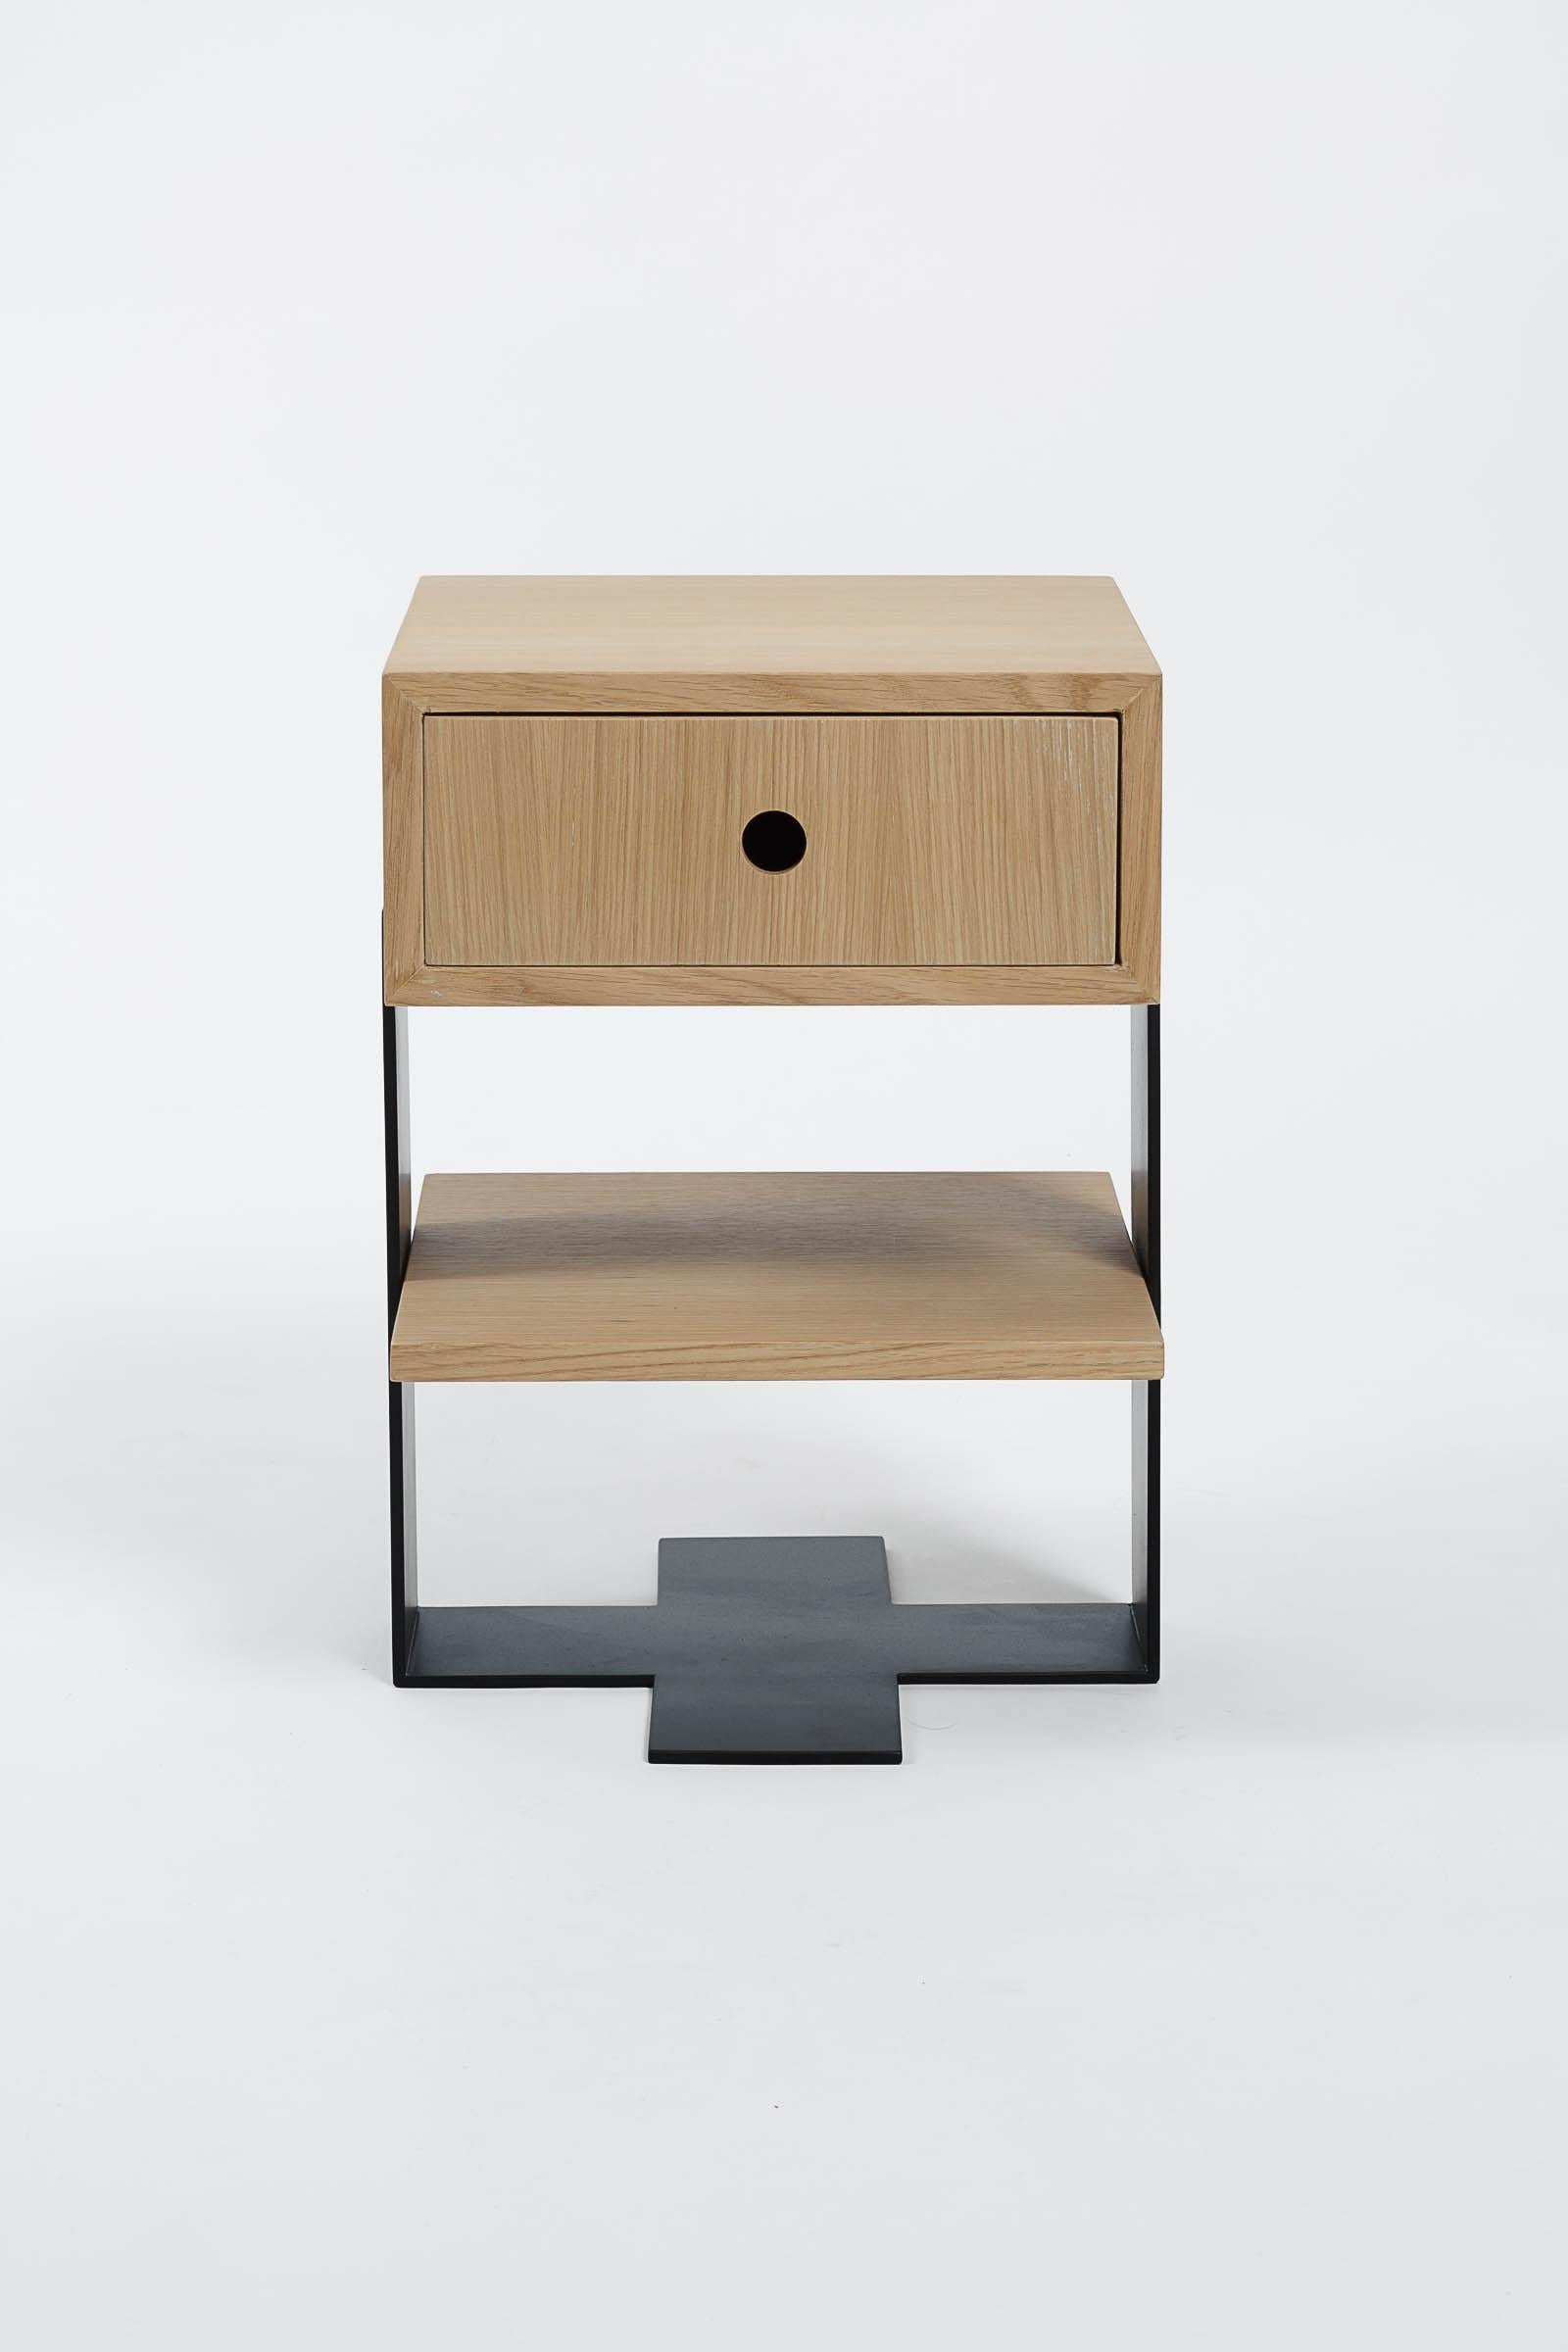 The Mayet bedside table consists of a drawer veneered in oak, levitating on a mat black steel base, hand polished and welded. A shelf also hand veneered in oak nests below the drawer for additional storage space. This designer bedside table, which